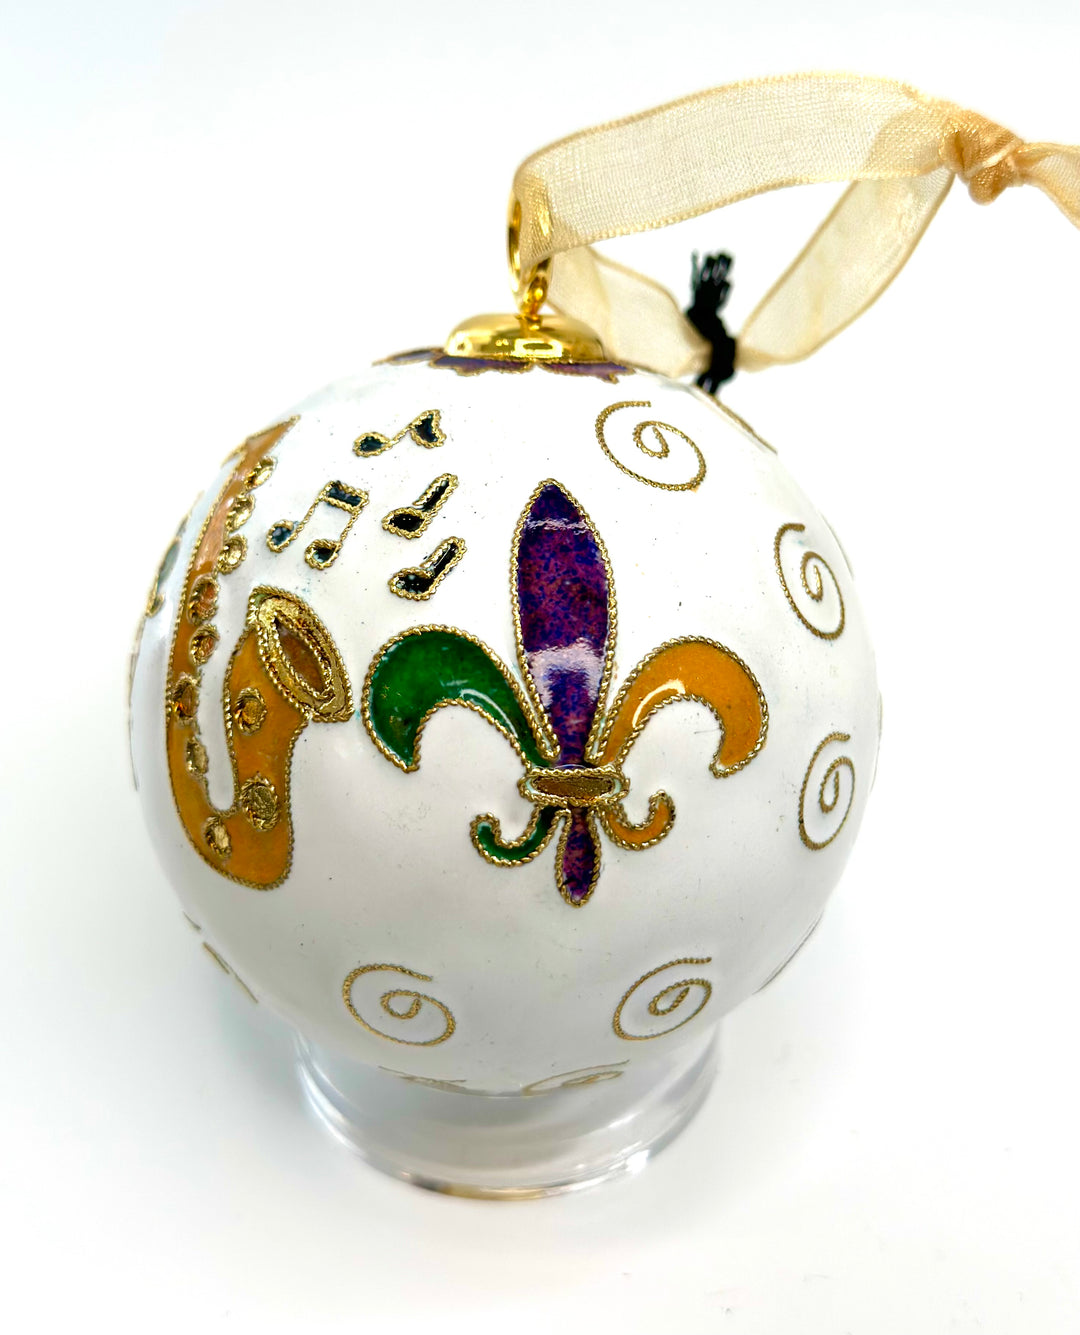 NOLA Word Mark with Icons Round Cloisonné Christmas Ornament